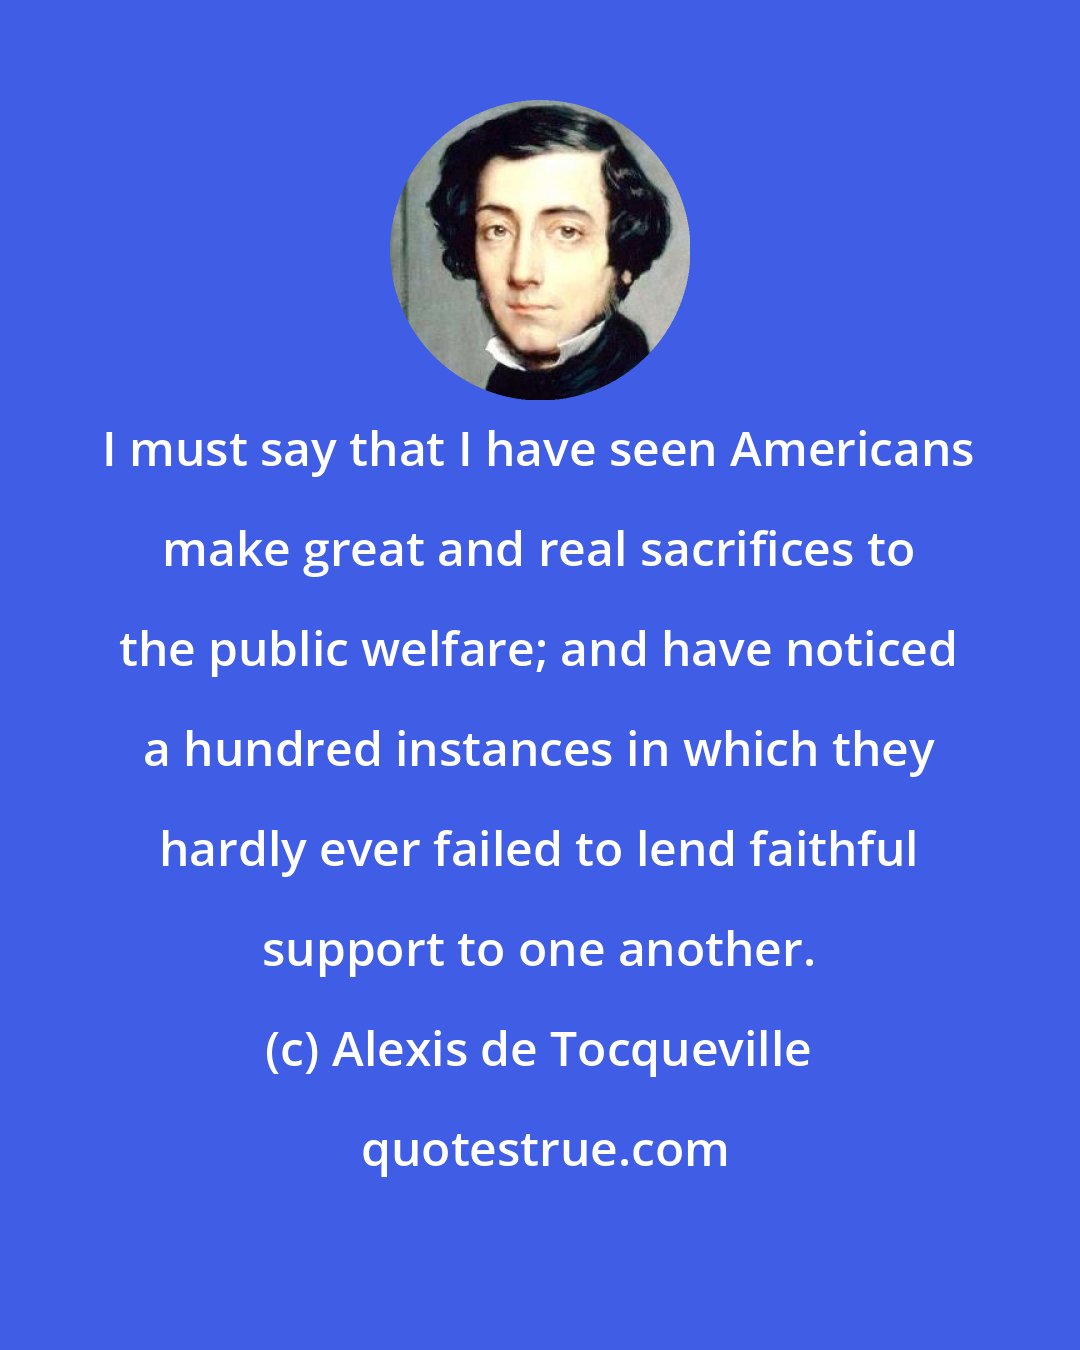 Alexis de Tocqueville: I must say that I have seen Americans make great and real sacrifices to the public welfare; and have noticed a hundred instances in which they hardly ever failed to lend faithful support to one another.